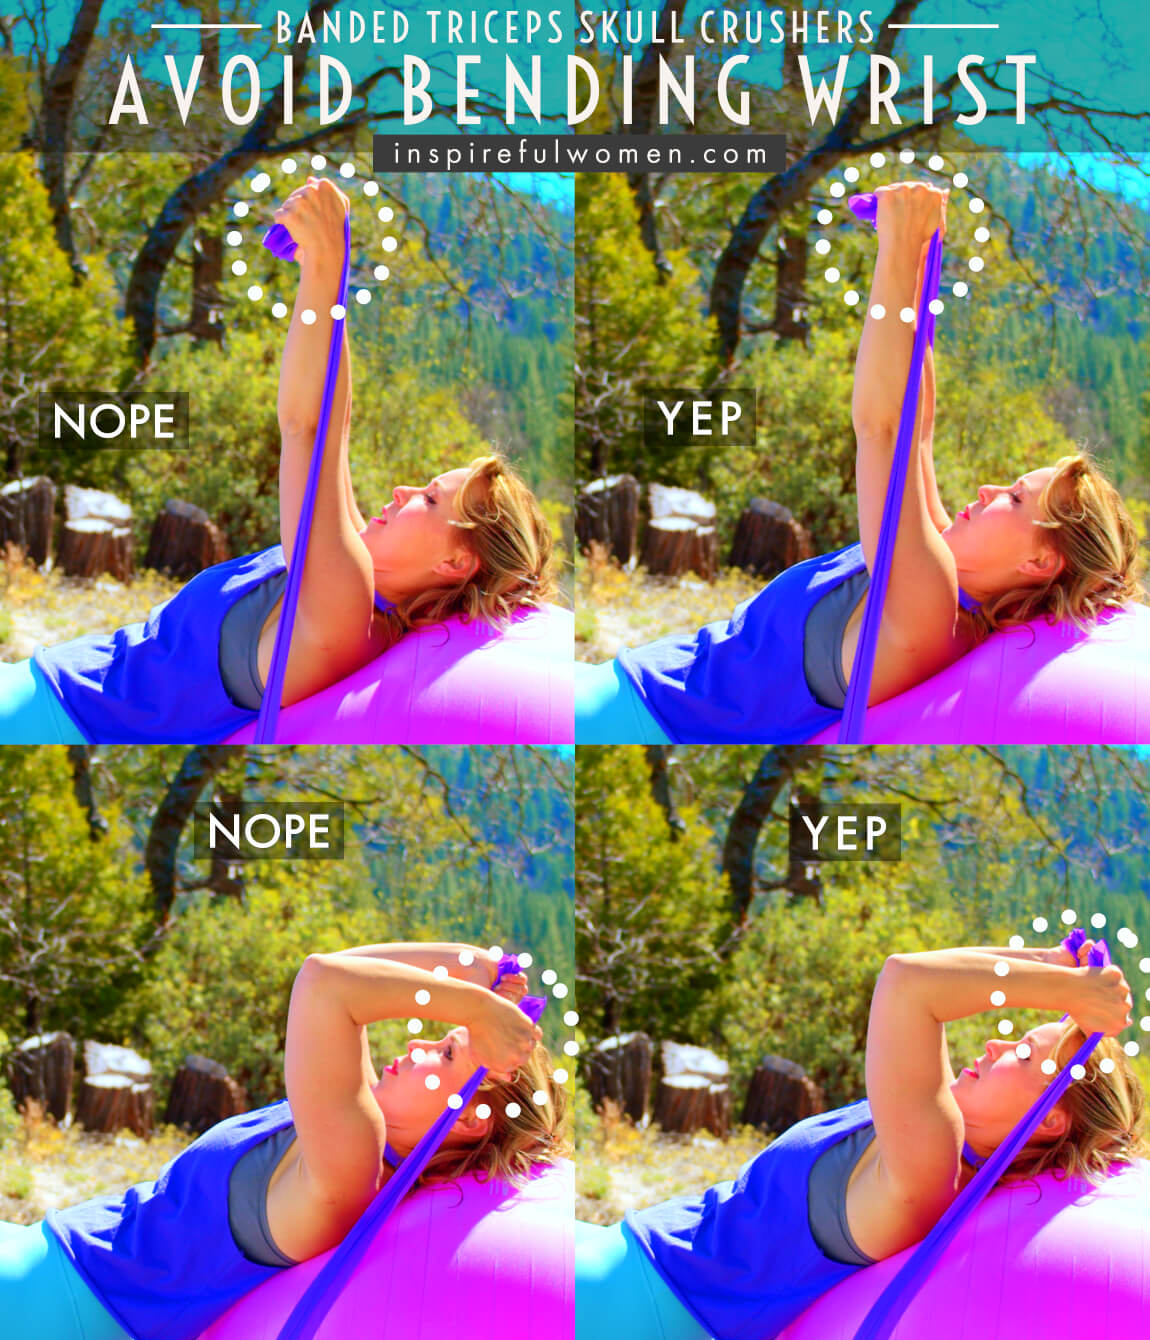 avoid-bending-wrists-banded-trice-skull-crushers-exercise-common-mistakes